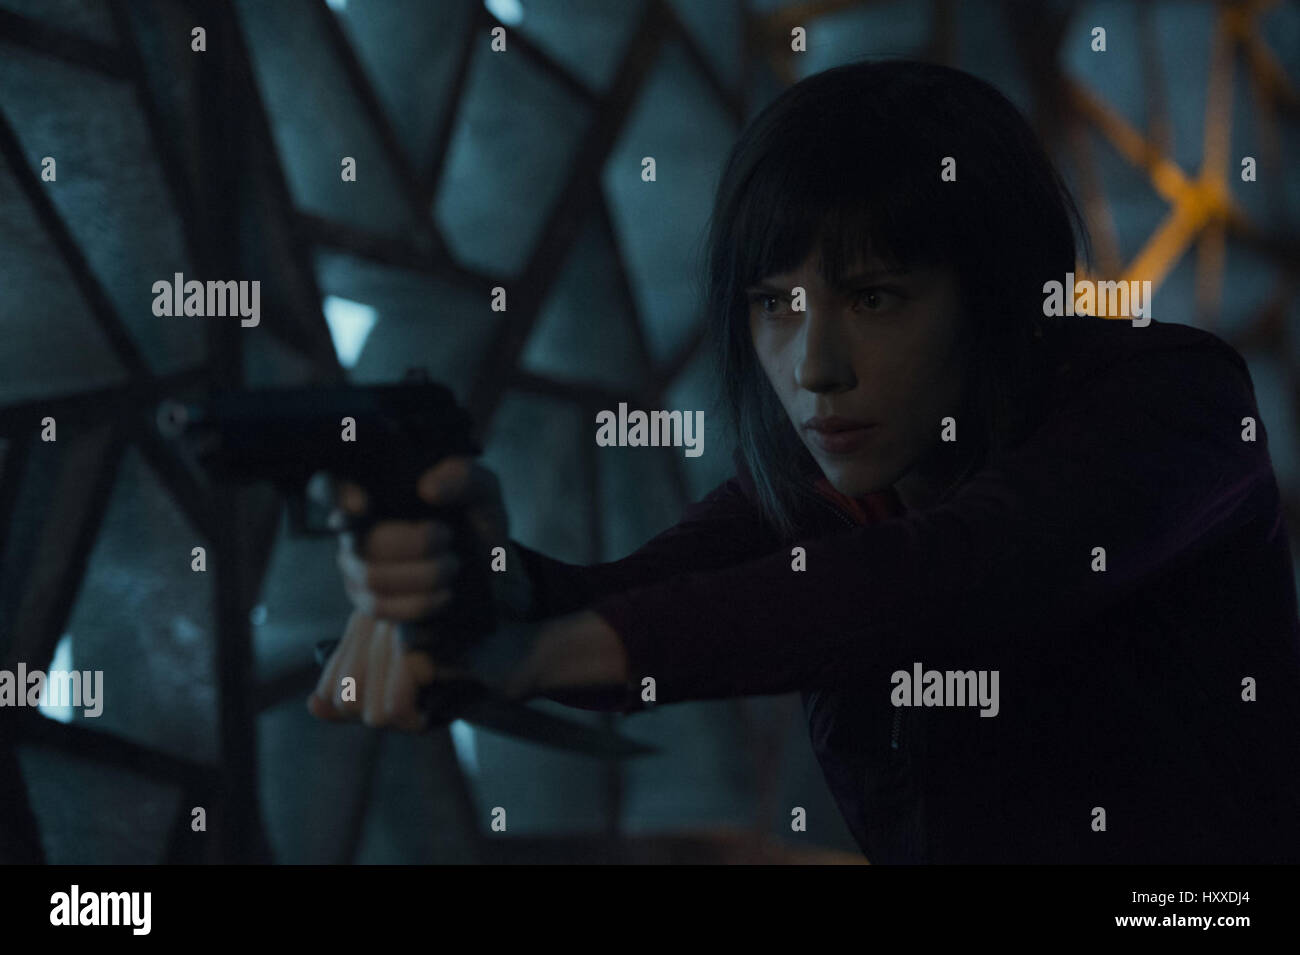 GHOST IN THE SHELL (2017) Britney Spears RUPERT SANDERS (DIR) UNIVERSAL PICTURES/COLLECTION MOVIESTORE LTD Banque D'Images